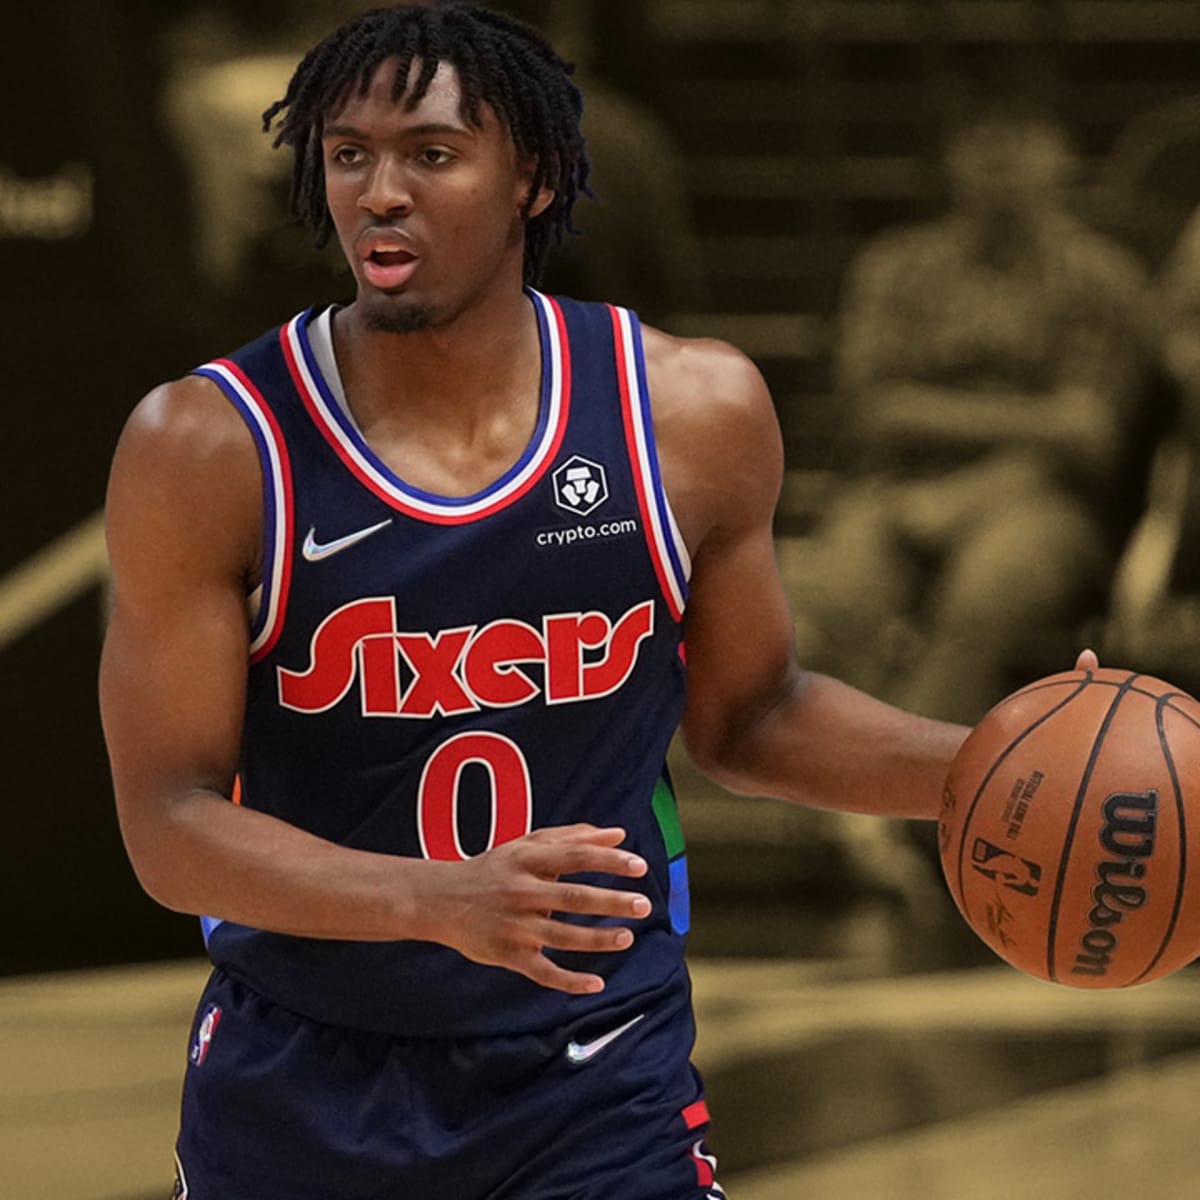 The Sixers Have Their Superstars. But Tyrese Maxey Is Their X-Factor.